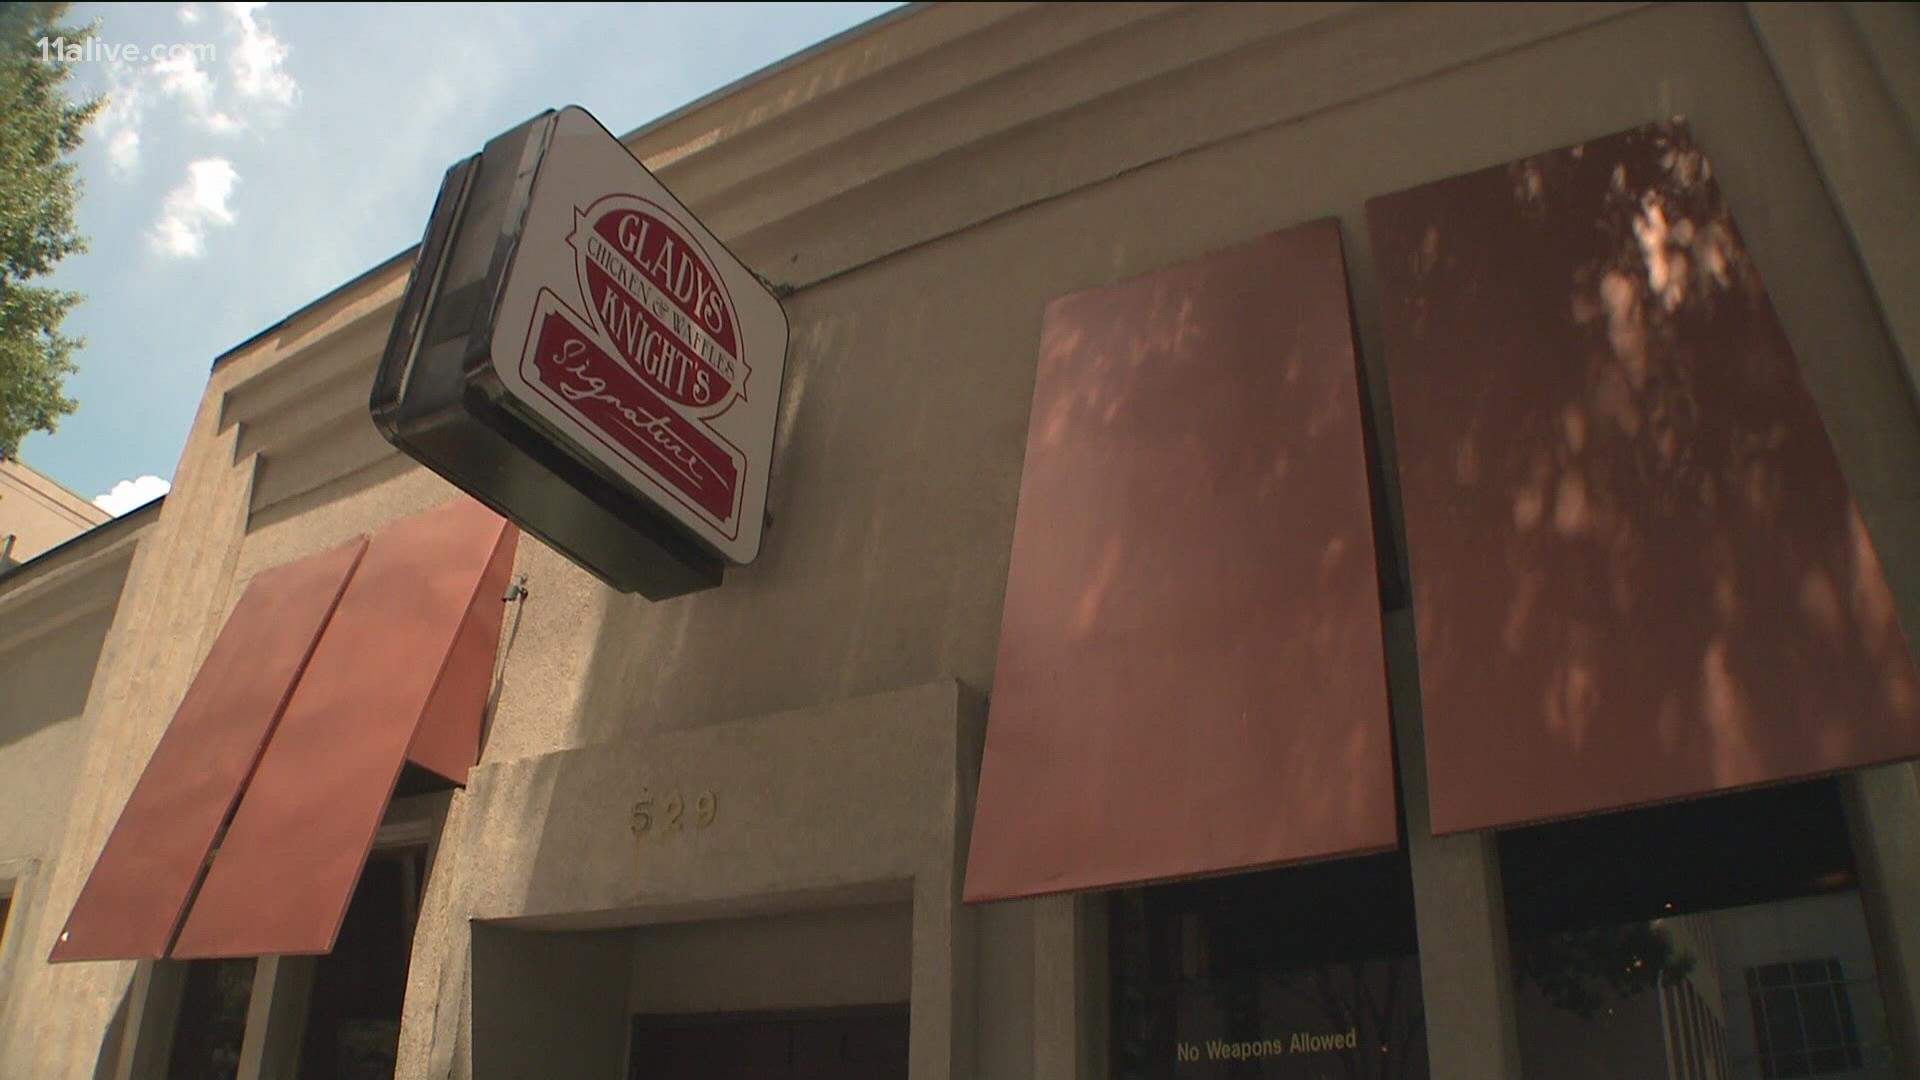 Gladys Knight’s Chicken and Waffles was once a landmark spot for Atlanta eaters. Now the former owner of the boarded up restaurant chain has been sentenced to prison